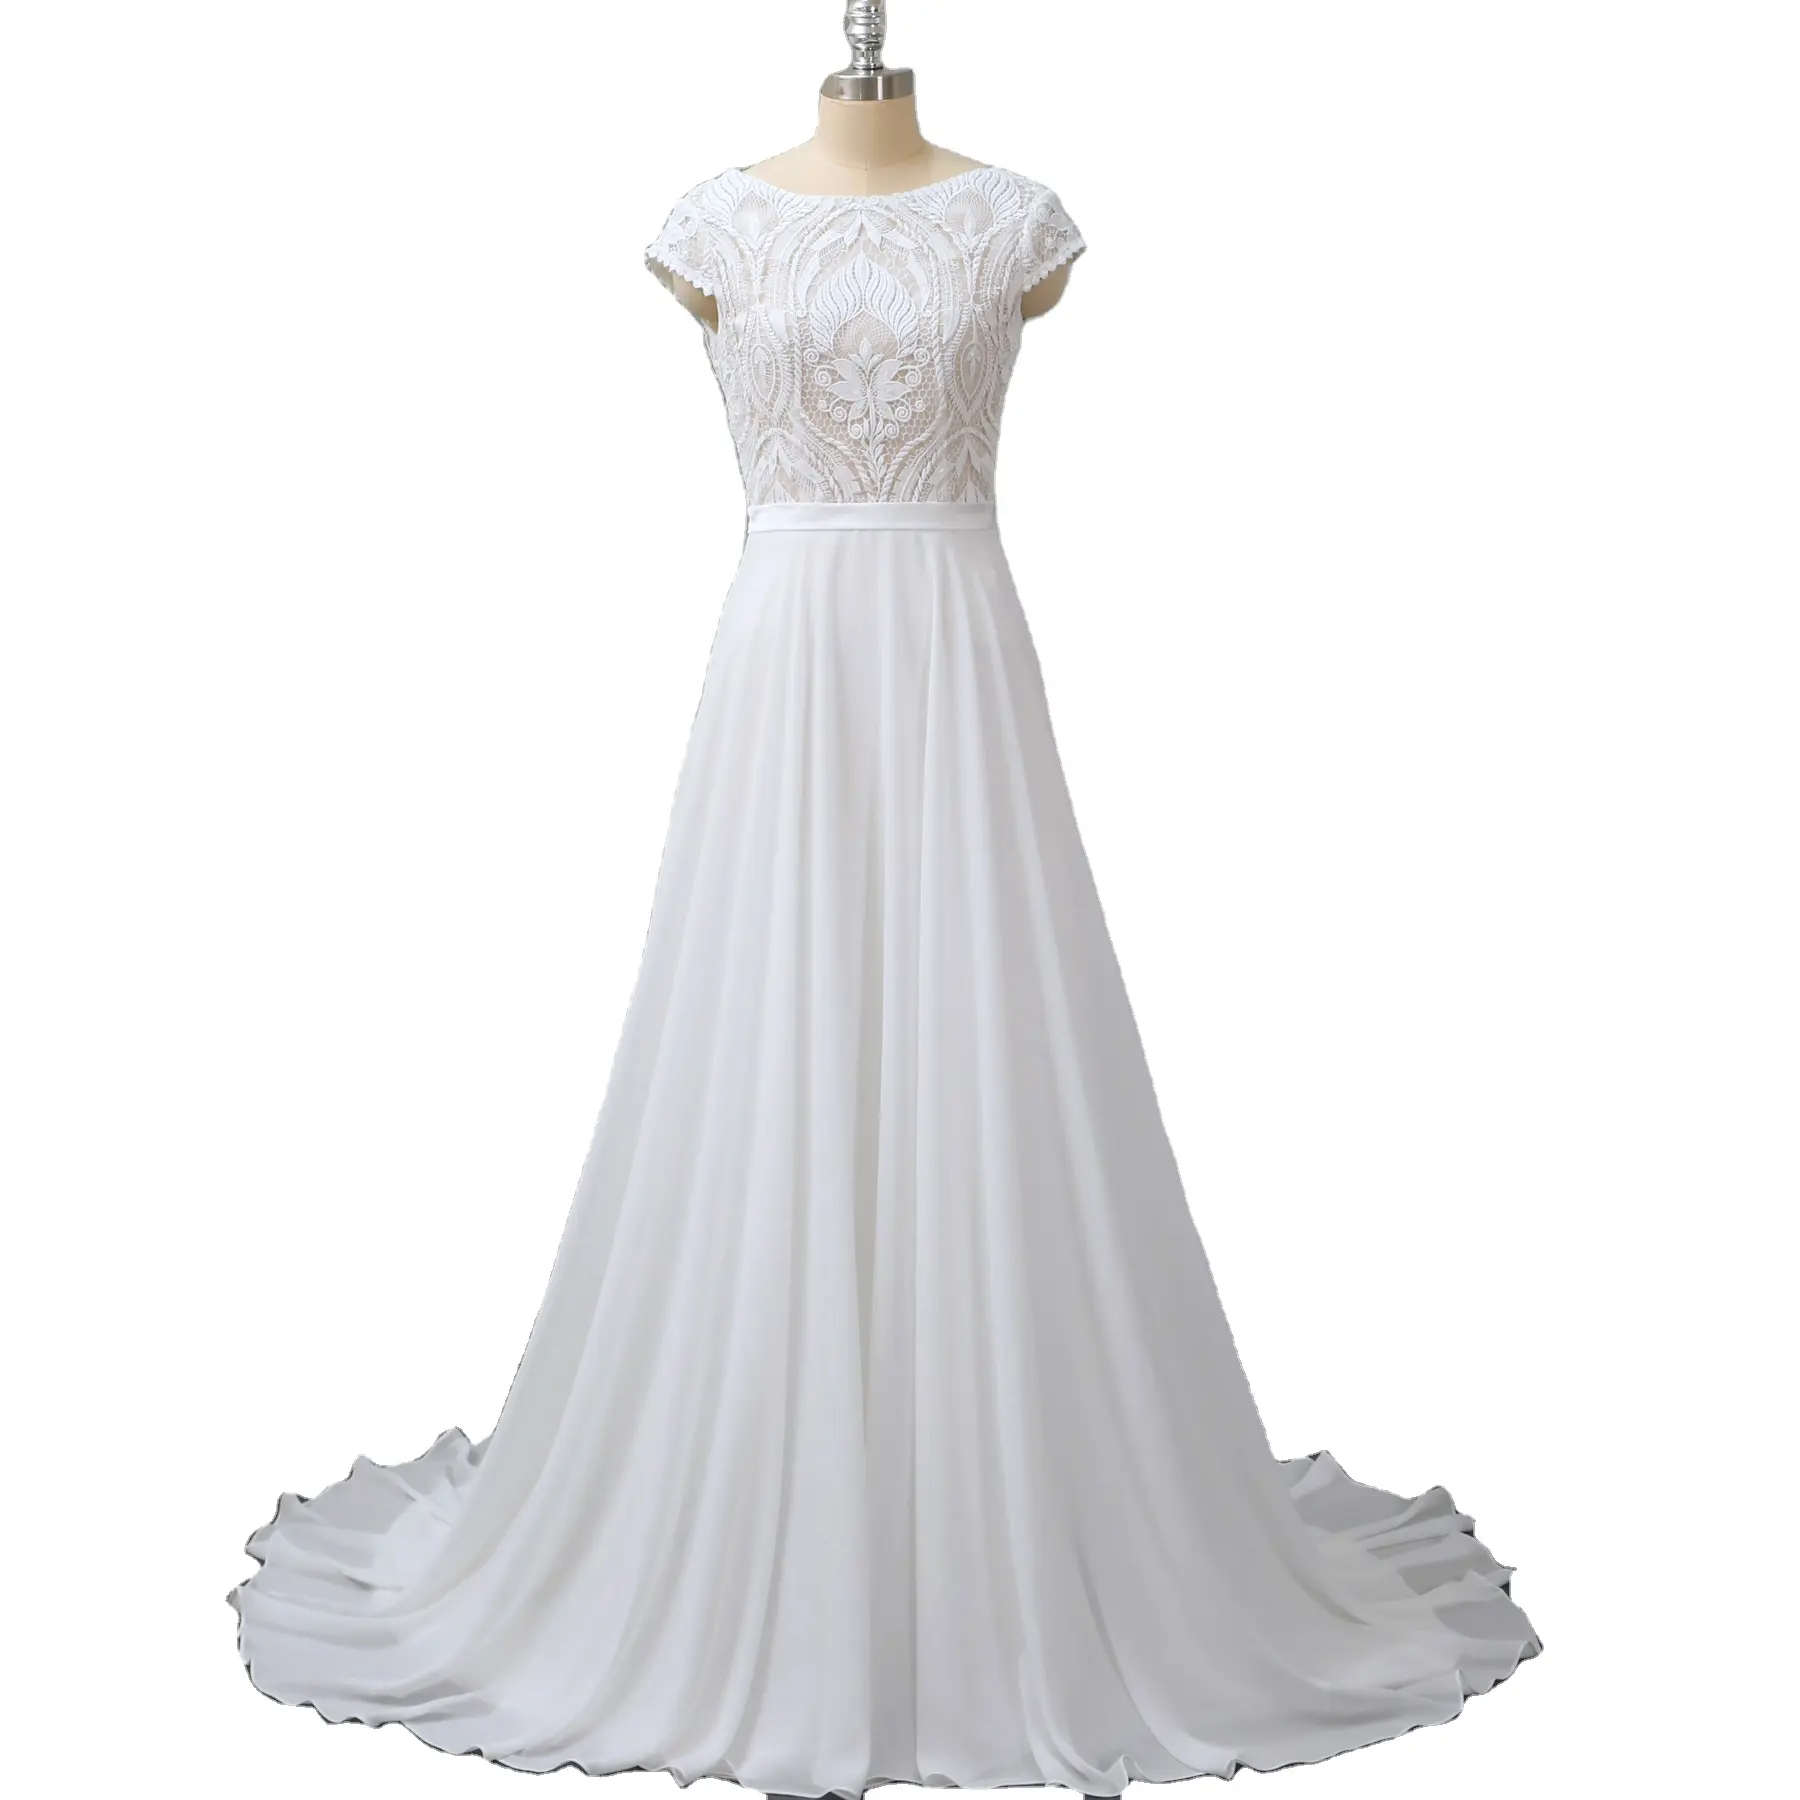 Cap sleeves Simple summer wedding dress with luxury lace